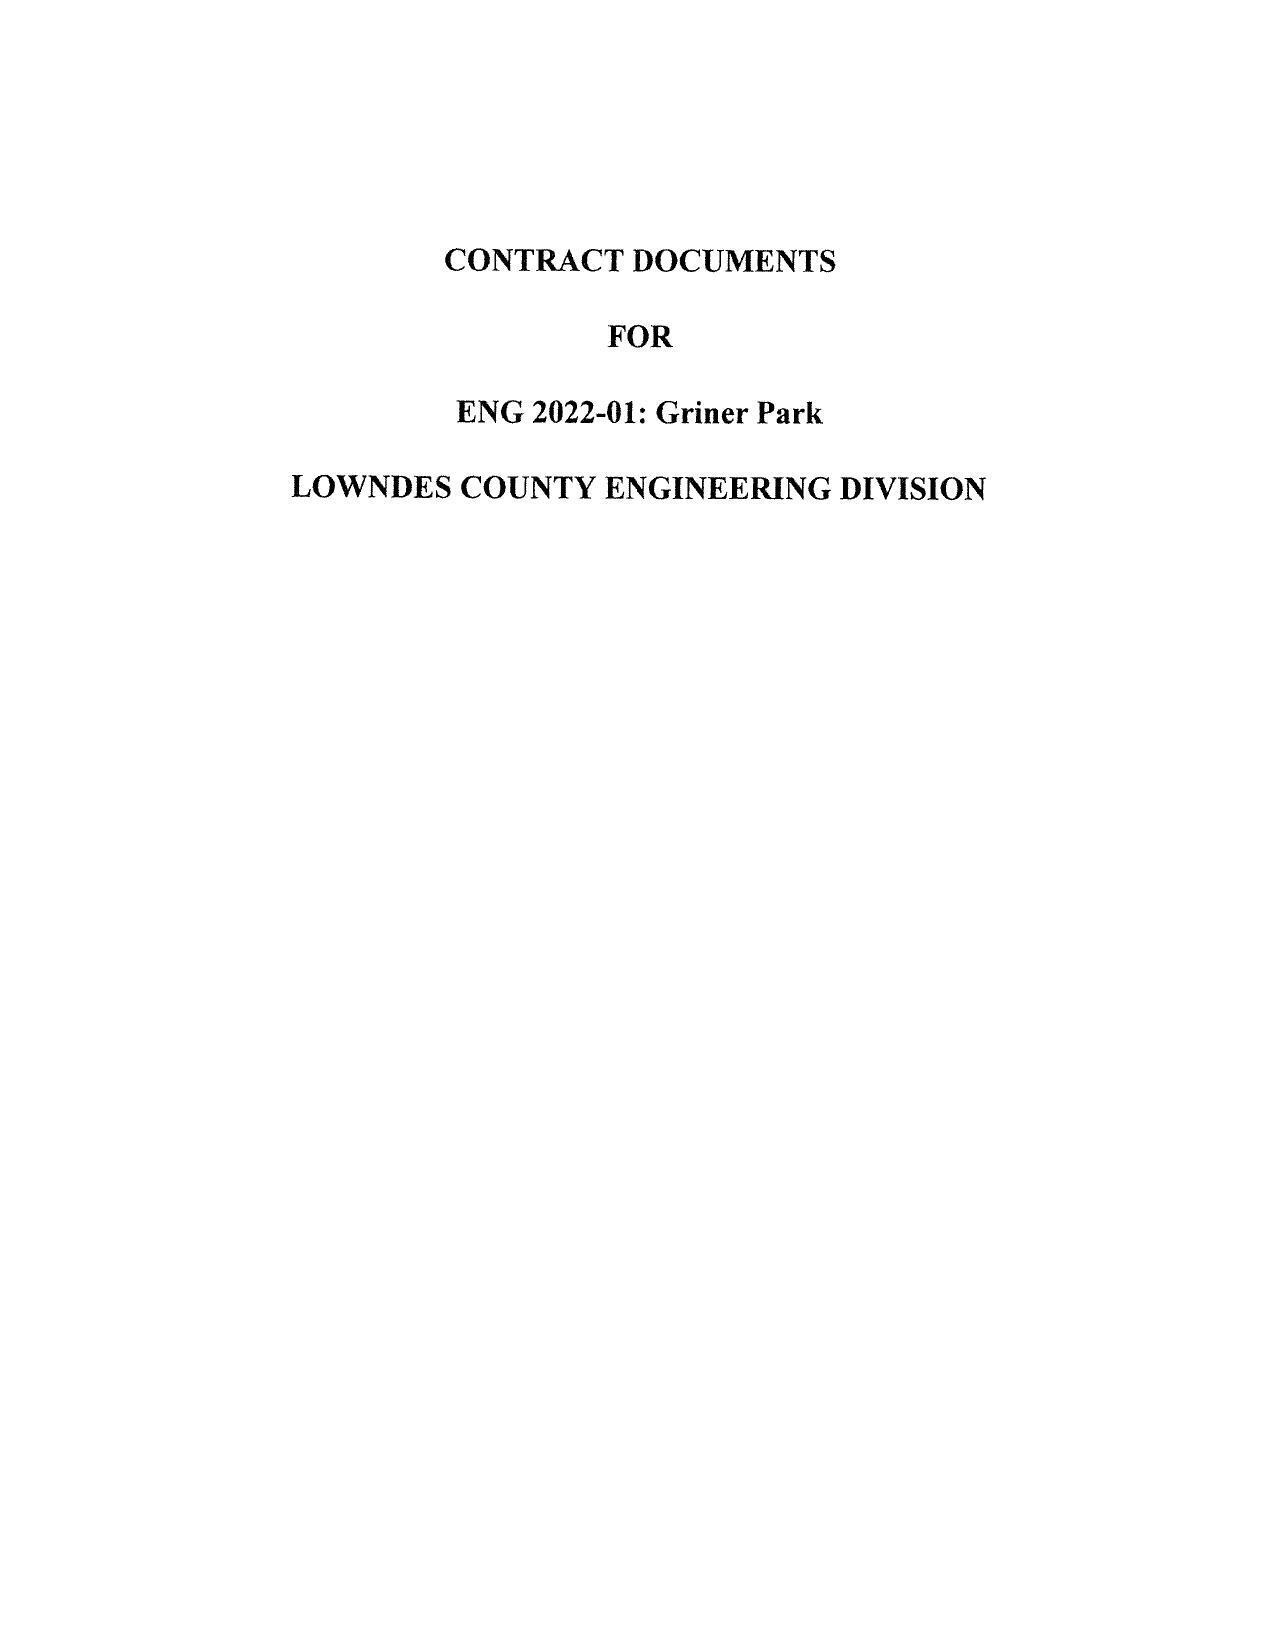 CONTRACT DOCUMENTS FOR ENG 2022-01: Griner Park